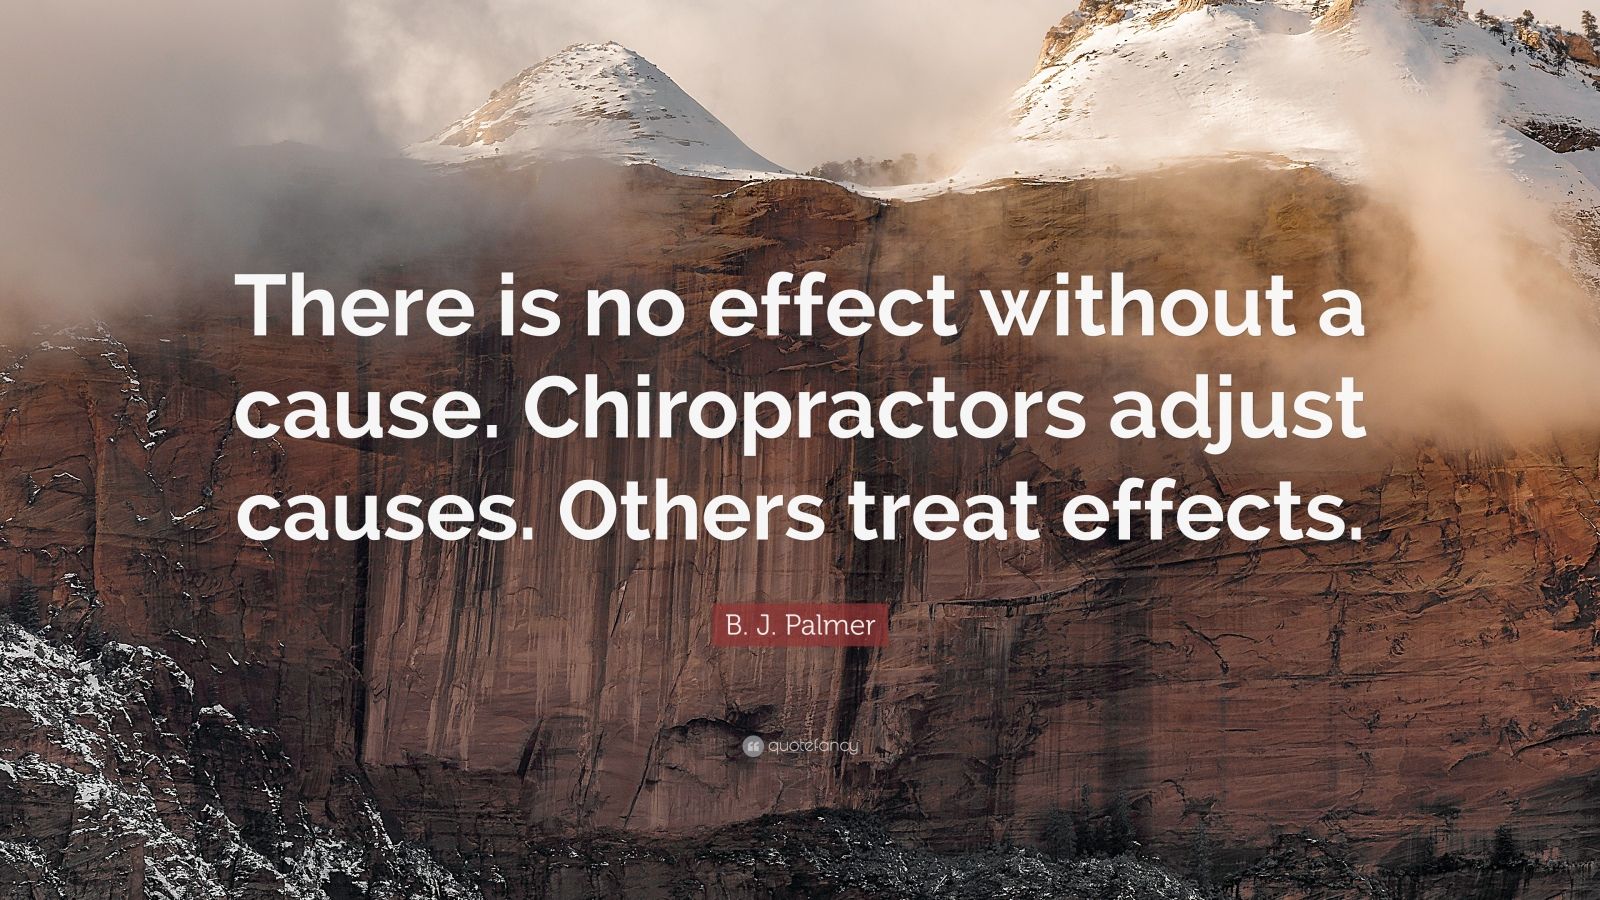 B. J. Palmer Quote: “There is no effect without a cause. Chiropractors